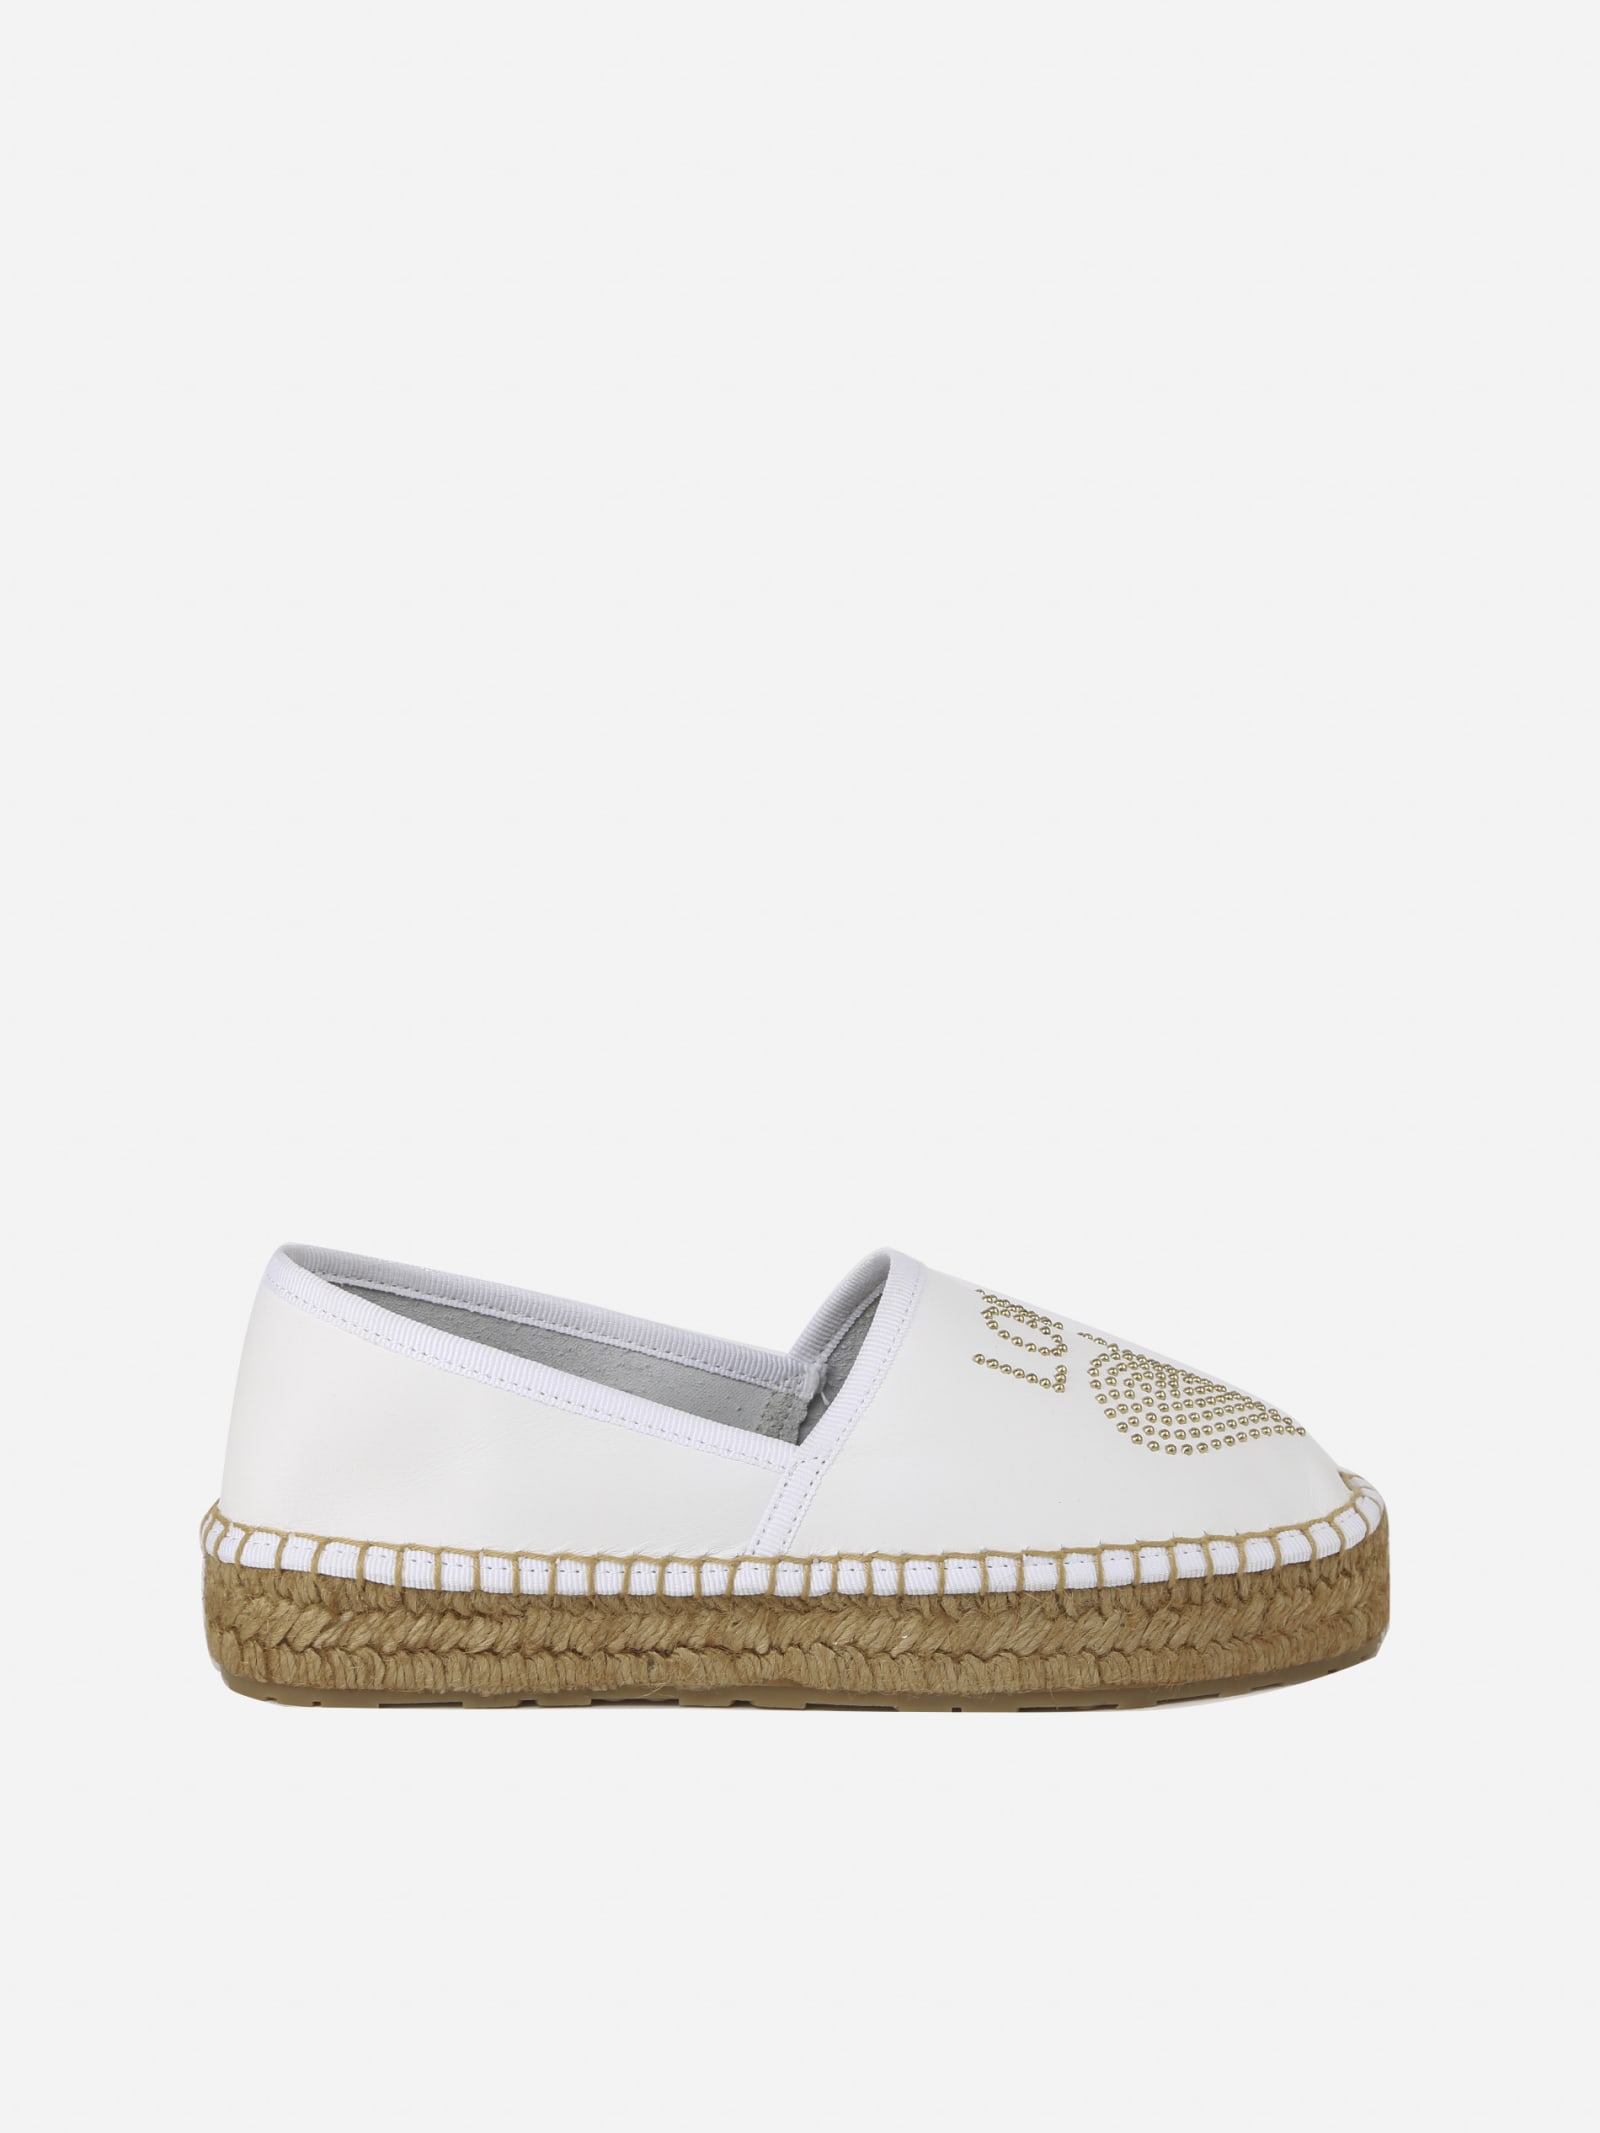 Buy Love Moschino Leather Espadrilles With Studs Detail online, shop Love Moschino shoes with free shipping